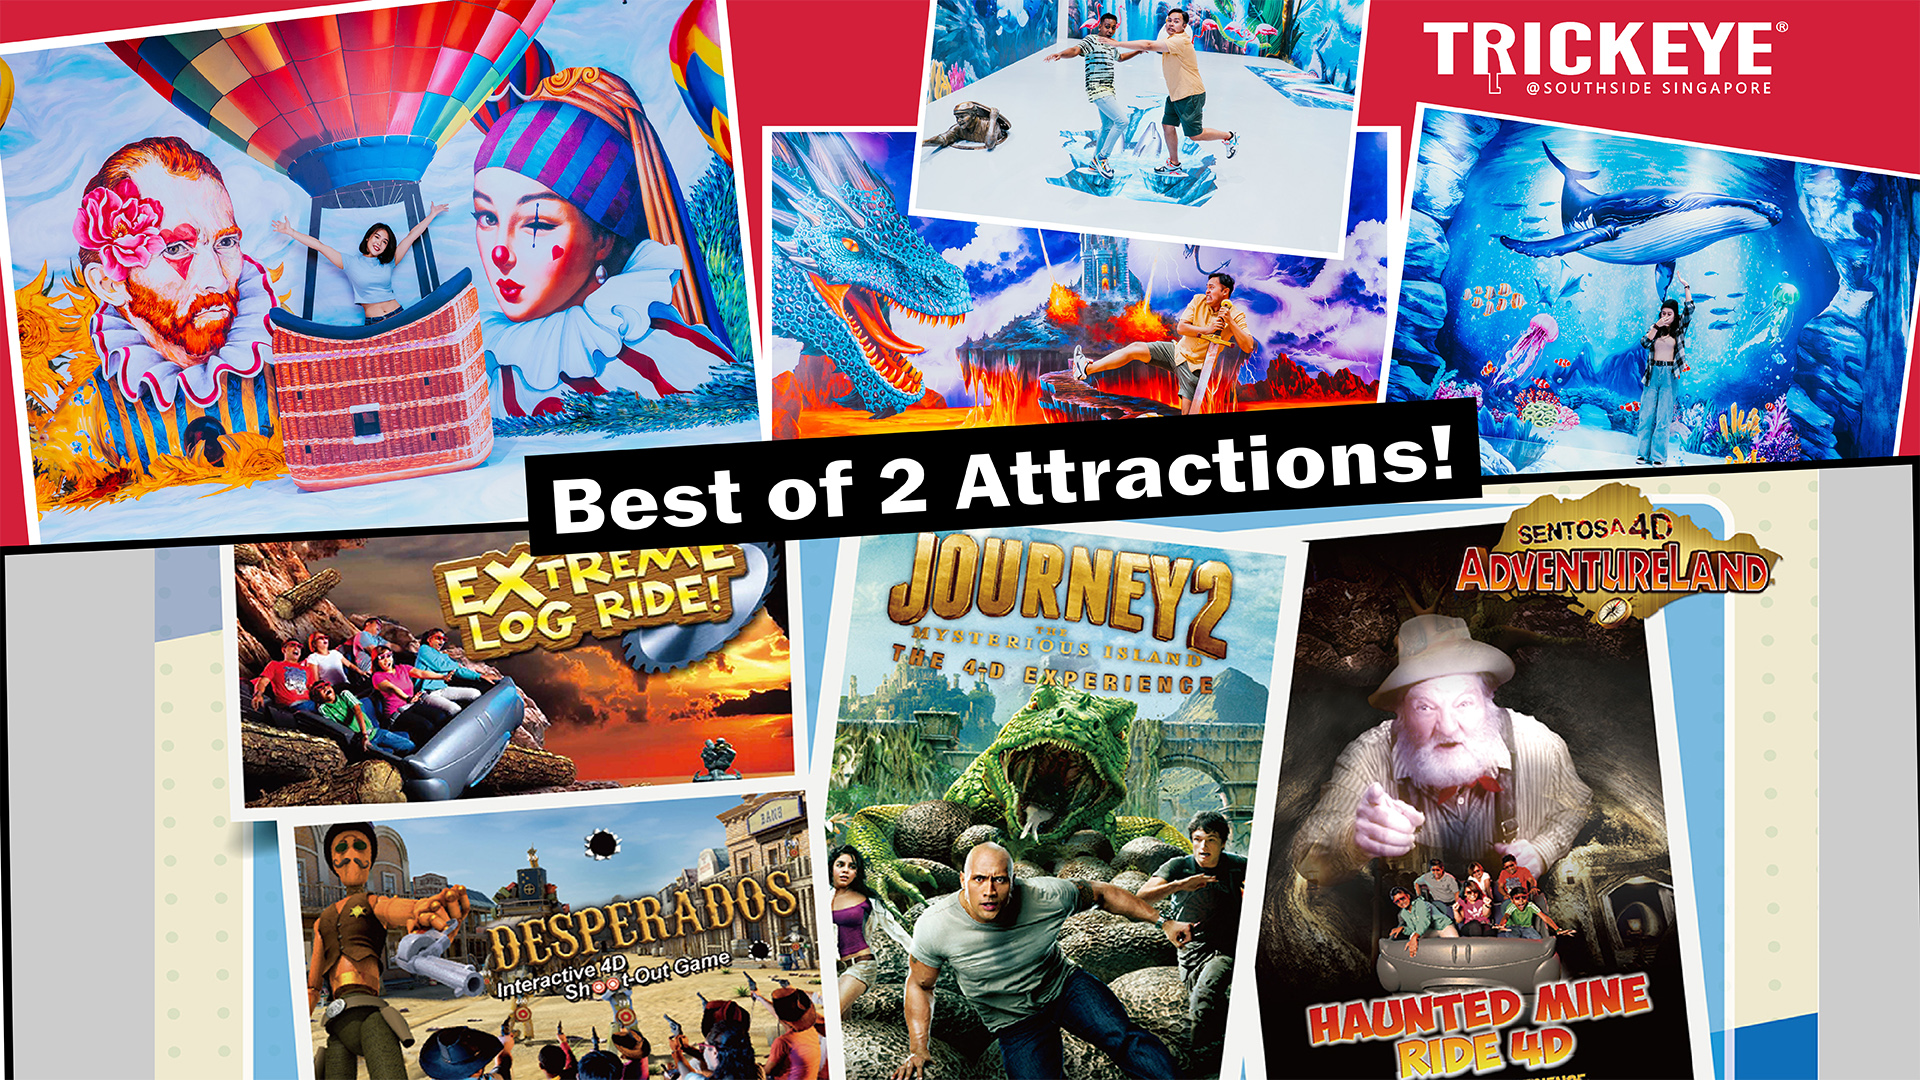 (Adult)  Trickeye @ Southside Admission + Sentosa 4D AdventureLand - 4-in-1 Combo (Up to 25% Off)